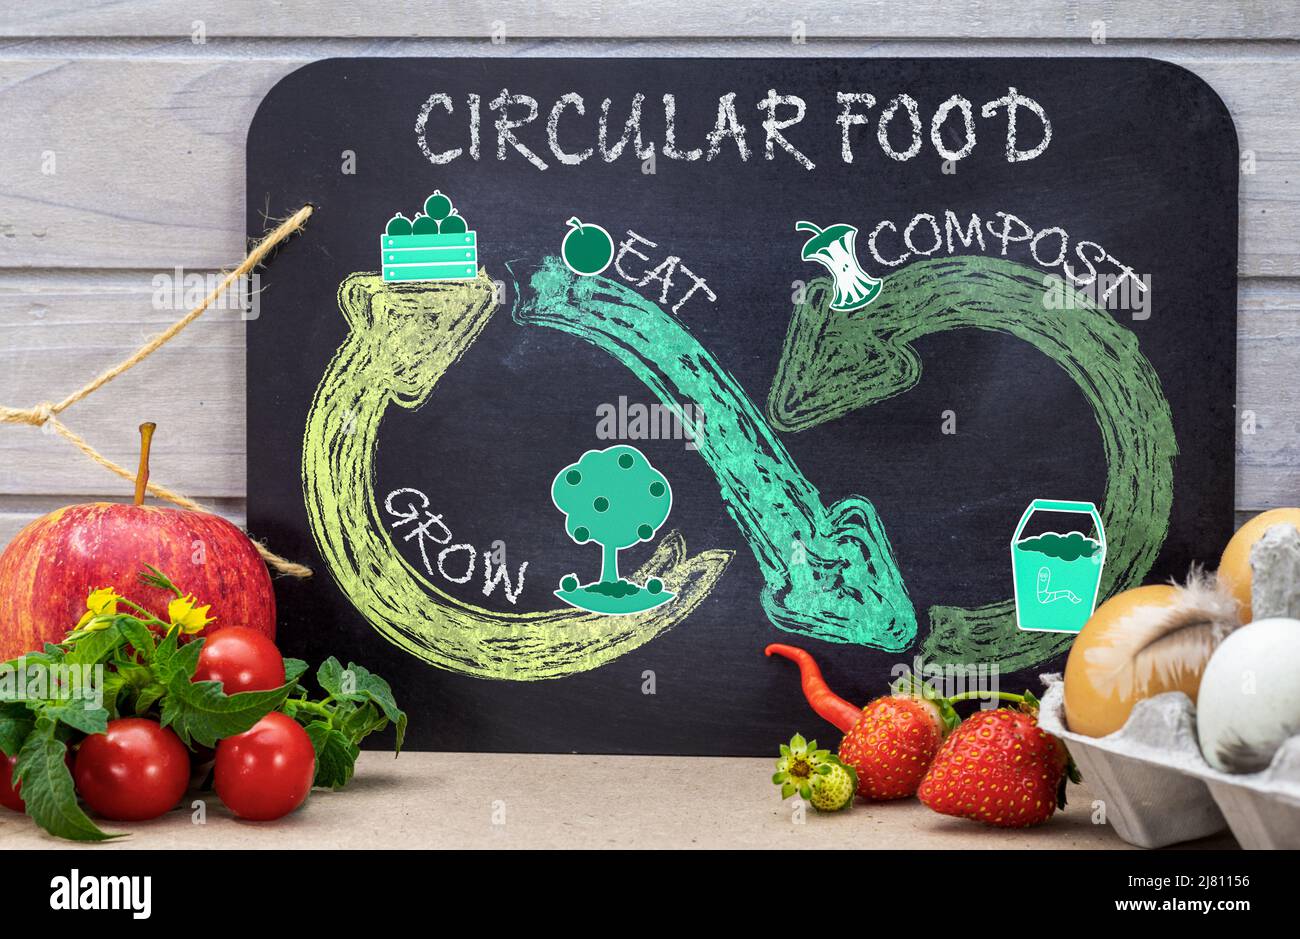 Circular food cycle on chalkboard with stickers and chalk drawing, reduce food waste, grow, eat, compost for sustainable food consumption. Stock Photo